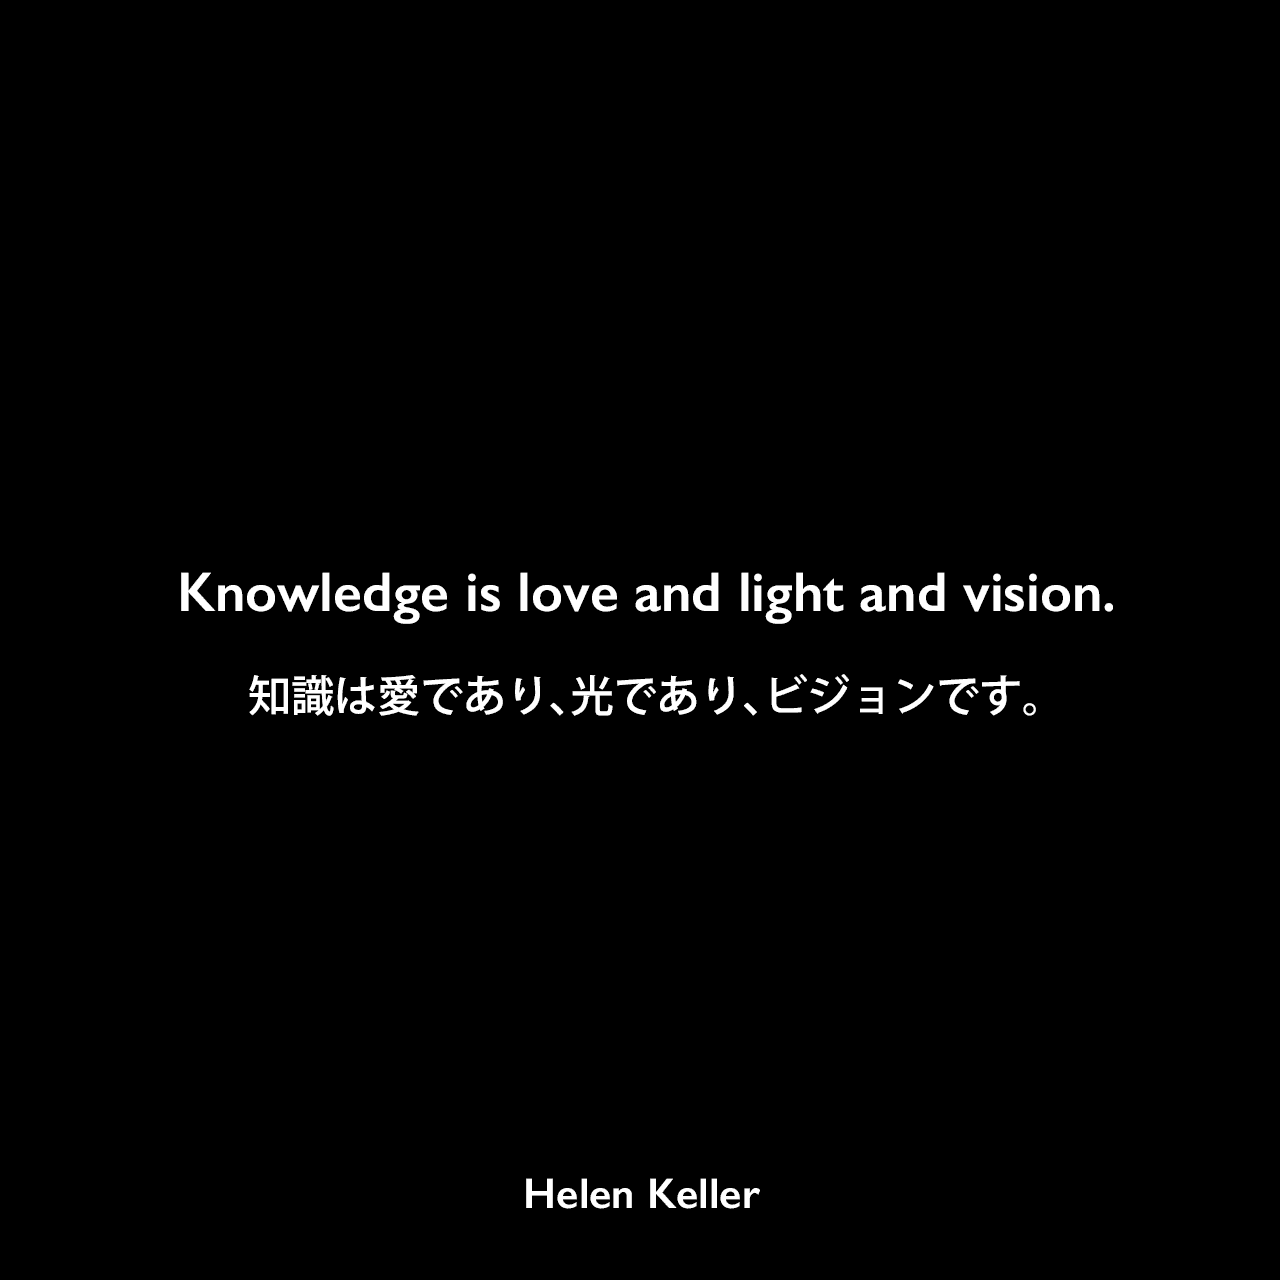 Knowledge is love and light and vision.知識は愛であり、光であり、ビジョンです。Helen Keller